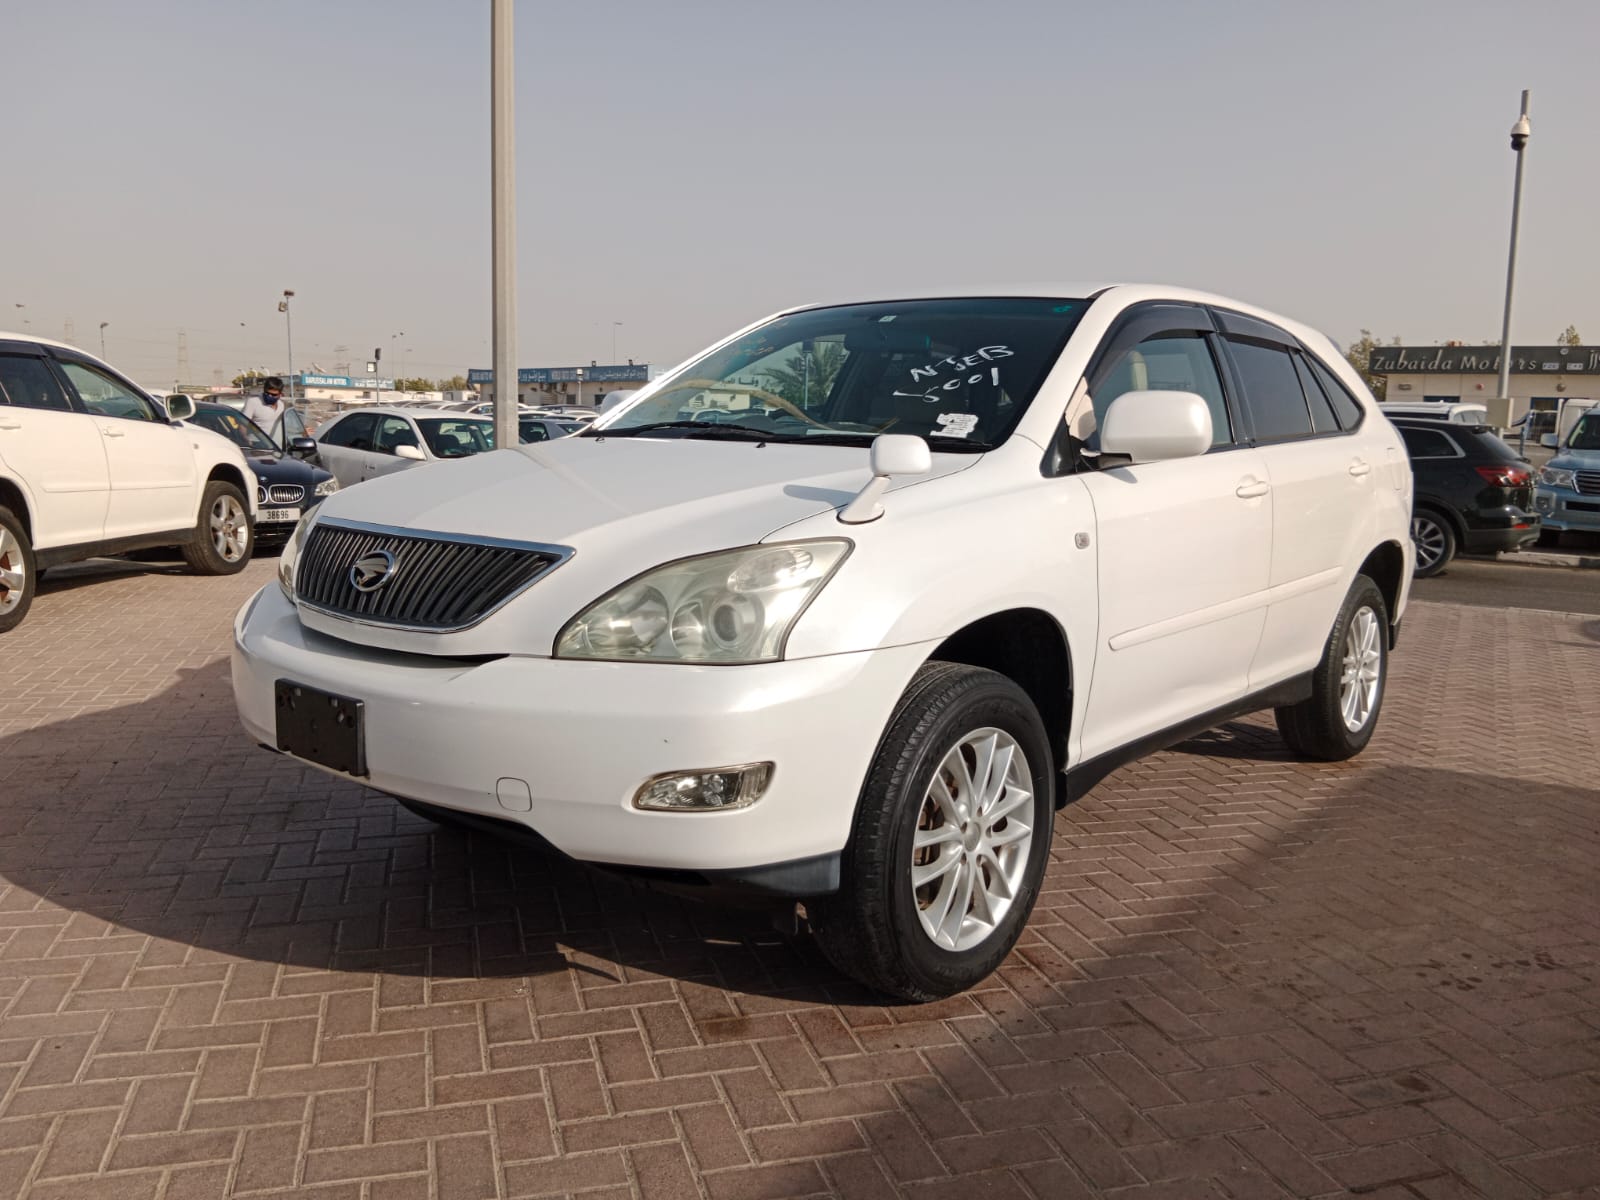 4568  TOYOTA HARRIER  2.4 A/T WHITE